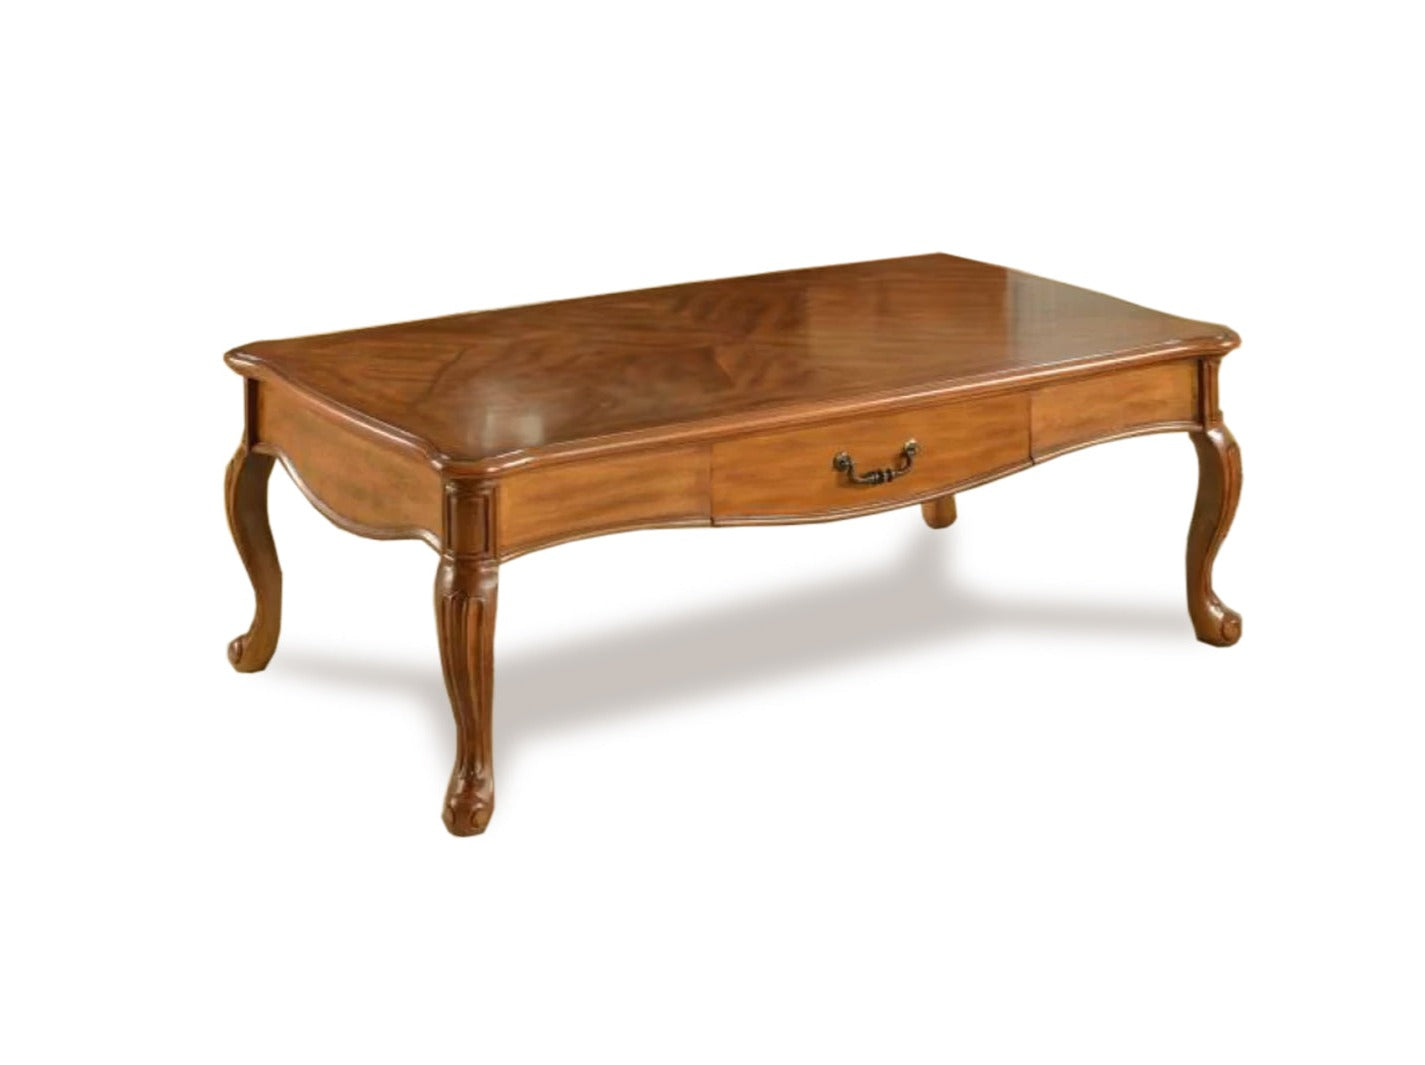 classic coffee table with drawer unit - Lux Furniture